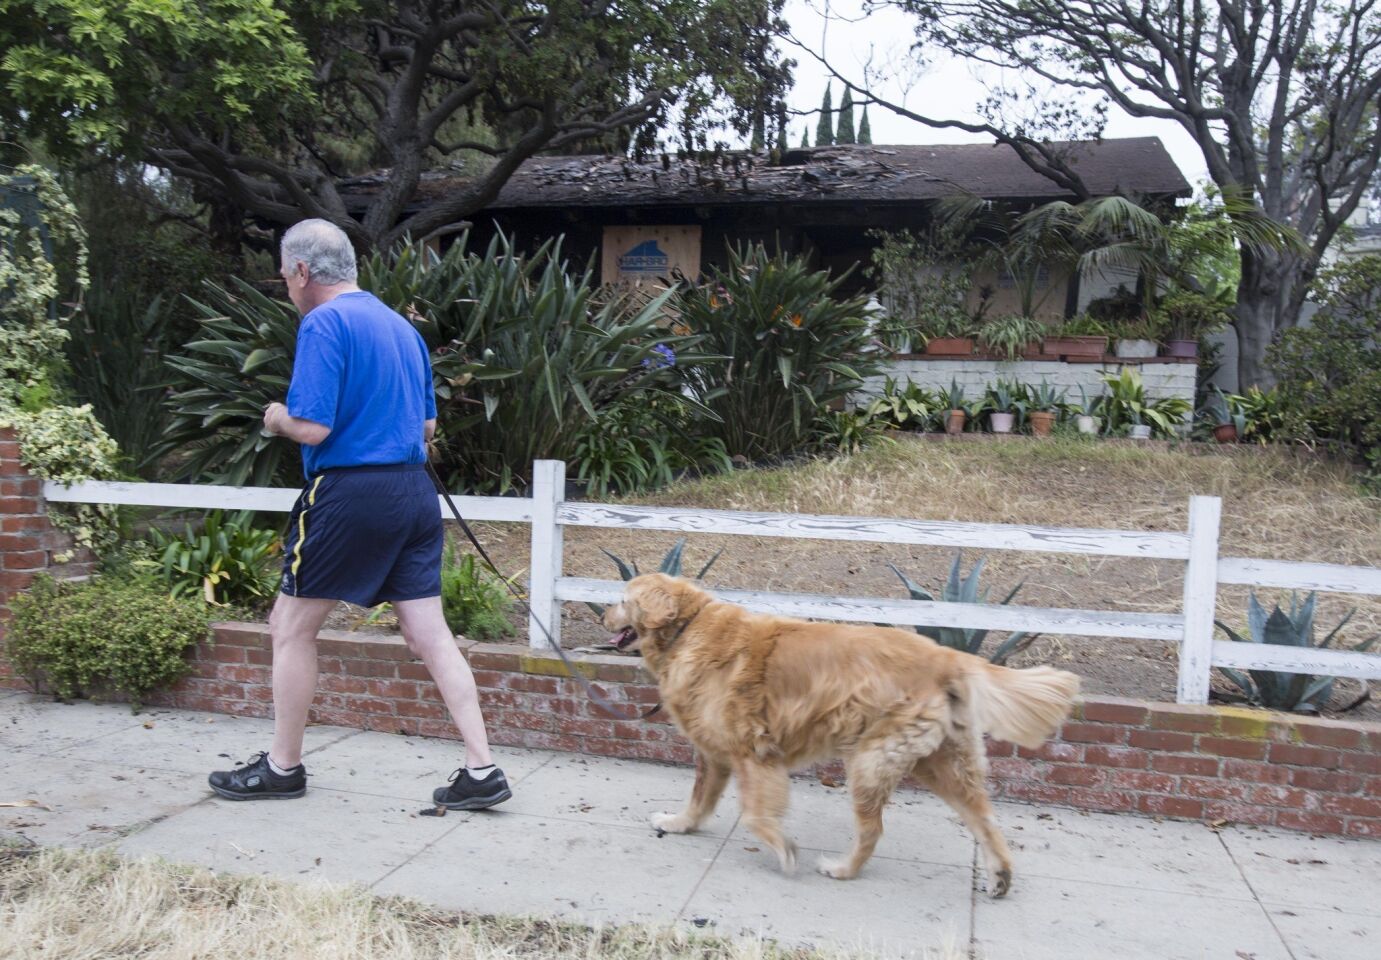 Mark Adams, 62, walks his dog, Gunnar, past the burned-out home in Santa Monica where two suspected victims of Friday's shooting rampage were found.